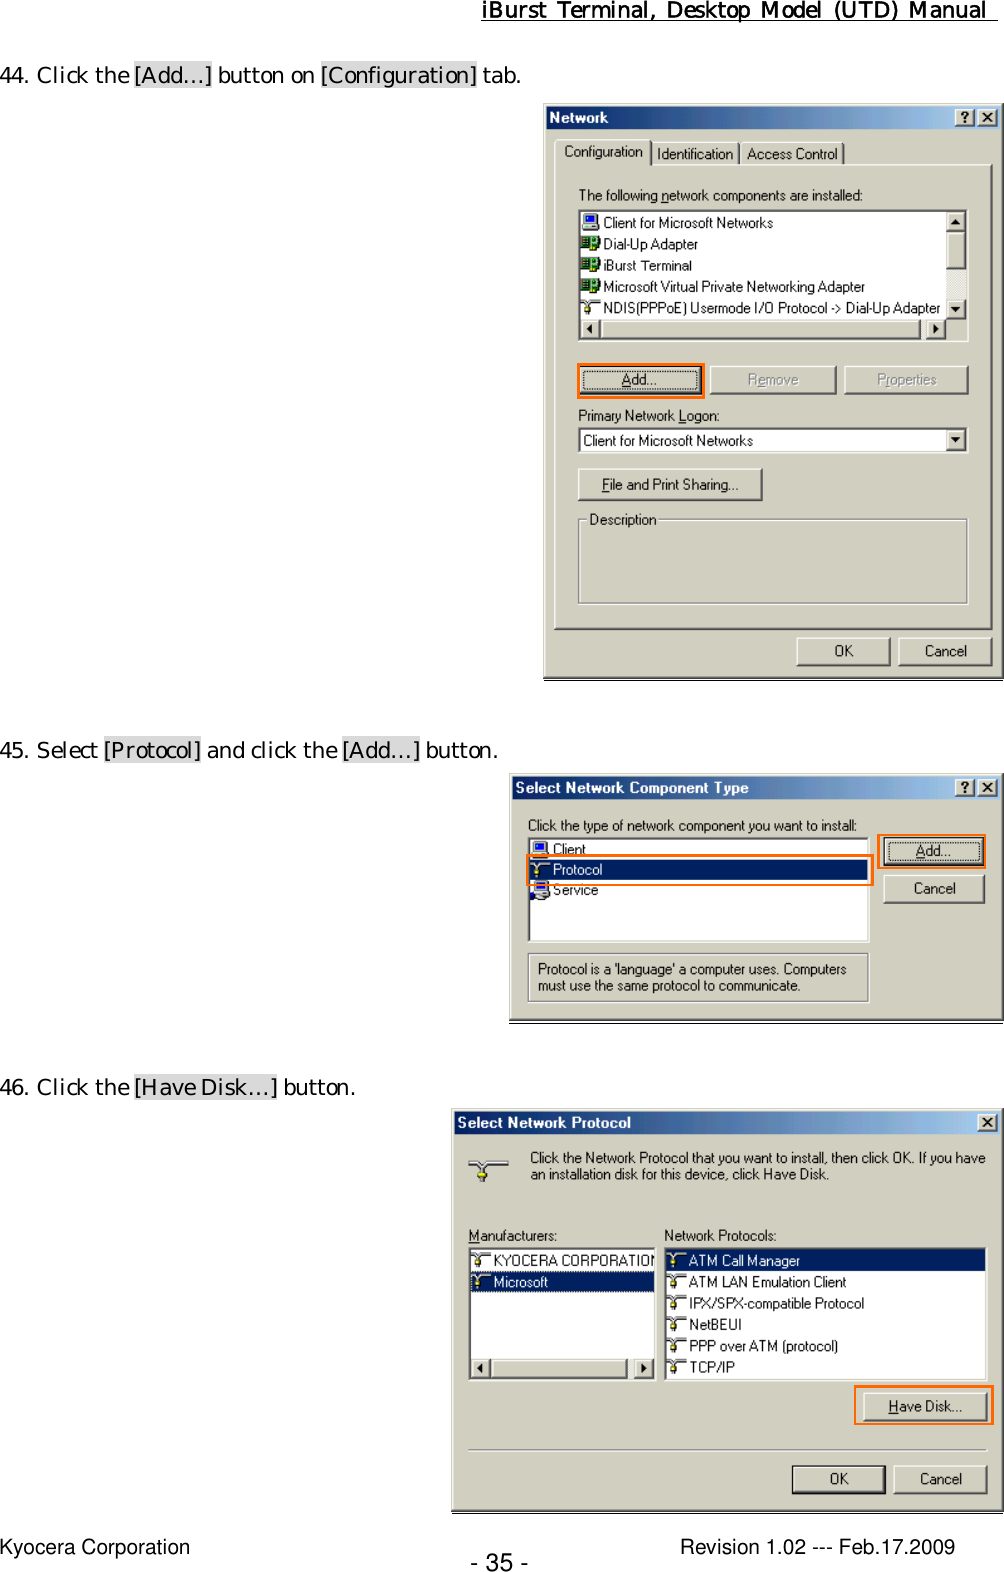 iBurst  Terminal, Desktop  Model  (UTD)  Manual    Kyocera Corporation                                                                                              Revision 1.02 --- Feb.17.2009 - 35 - 44. Click the [Add…] button on [Configuration] tab.   45. Select [Protocol] and click the [Add…] button.   46. Click the [Have Disk…] button.  